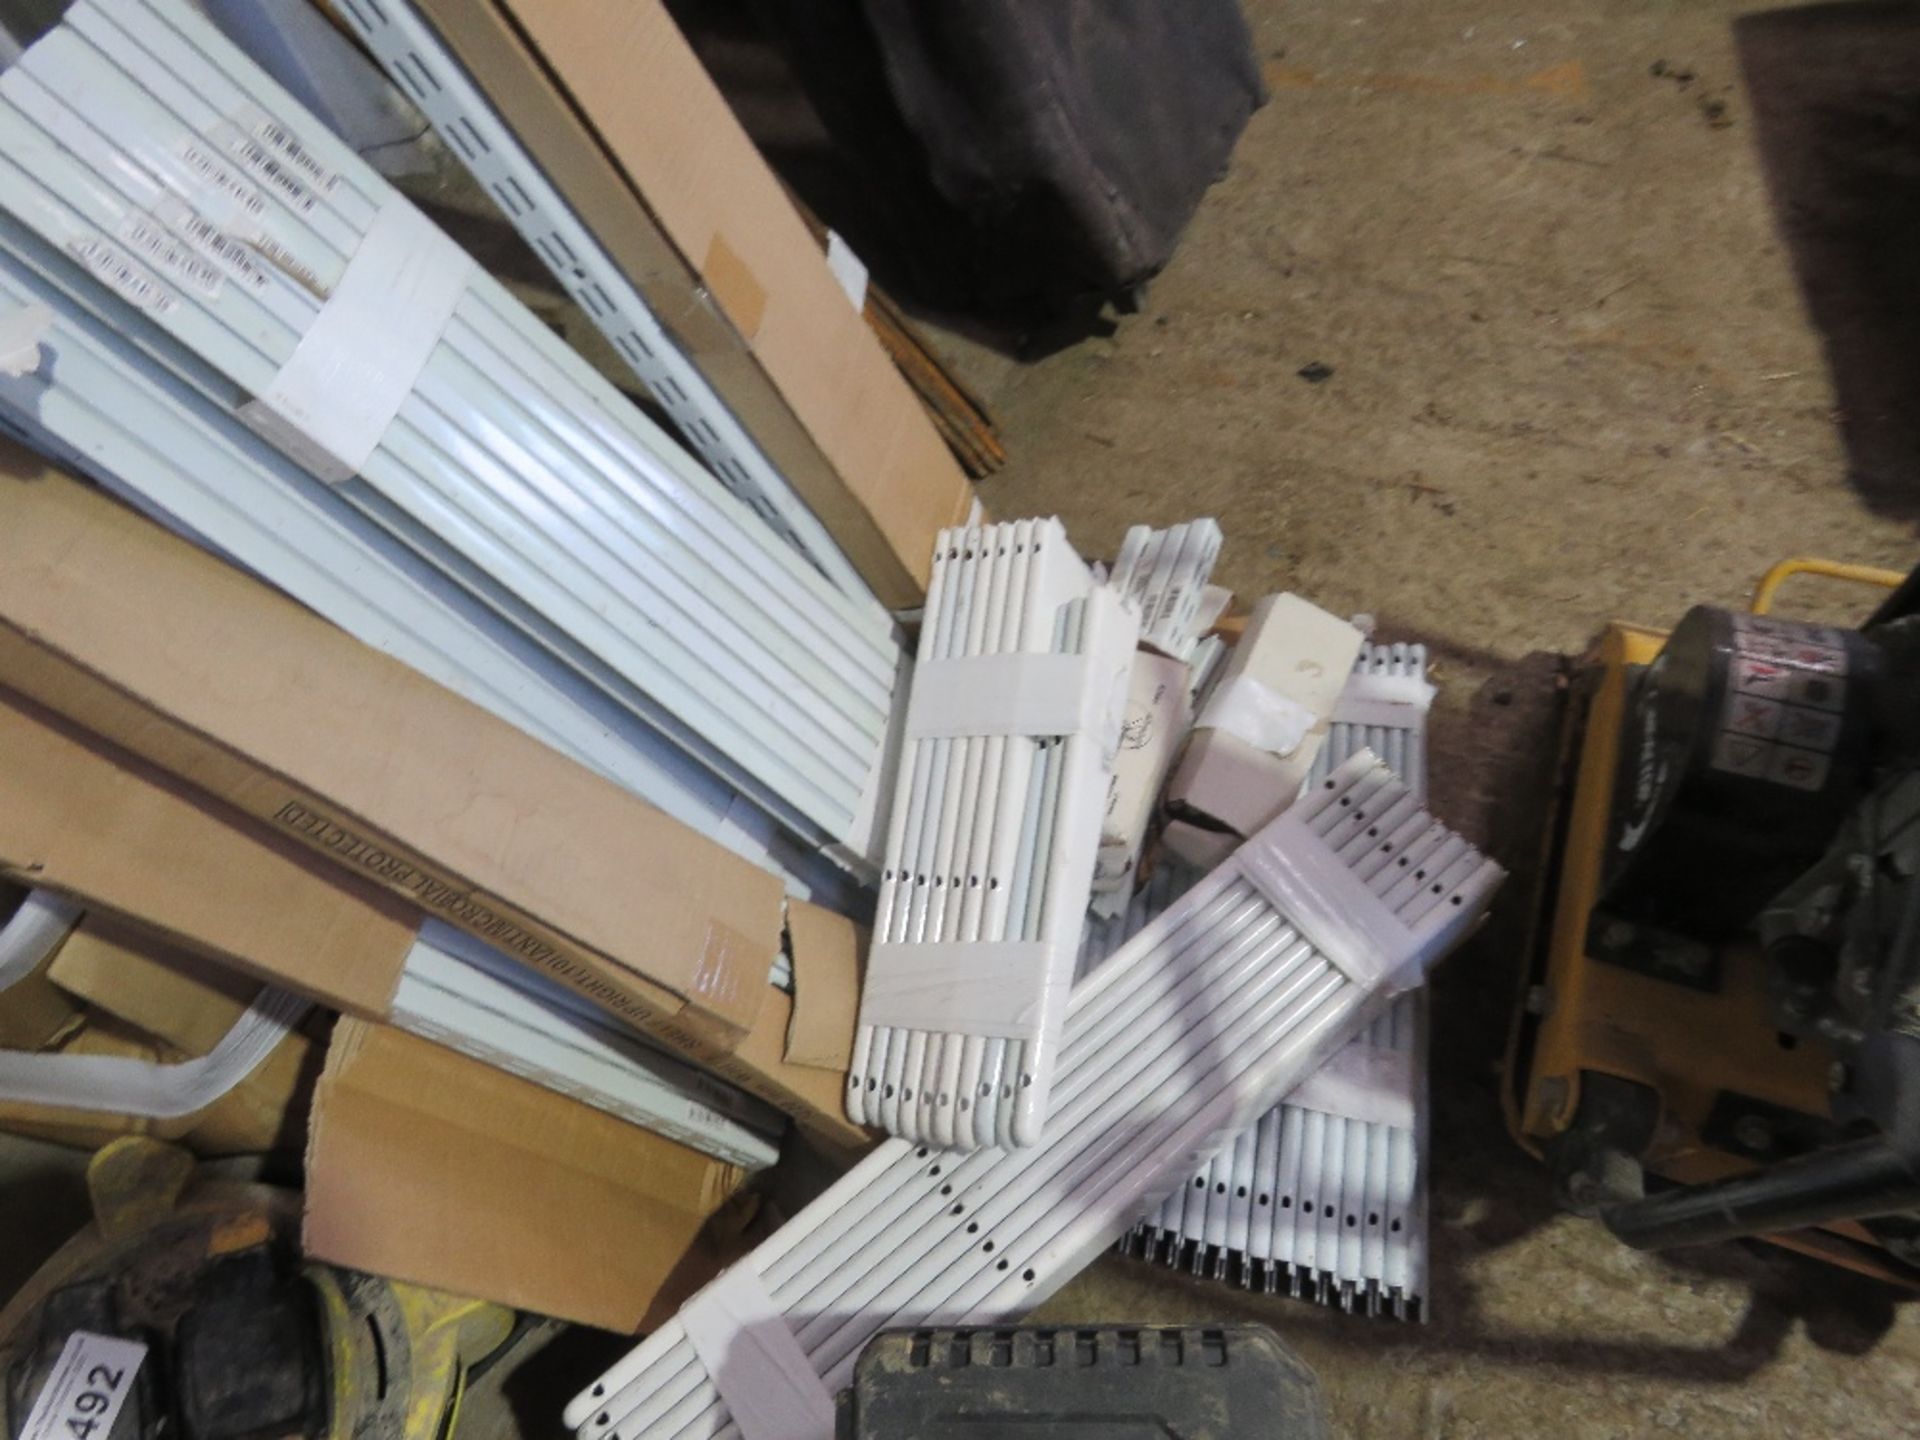 LARGE QUANTITY OF MODULAR SHELVING PARTS. DIRECT FROM LOCAL LANDSCAPE COMPANY WHO ARE CLOSING A DEPO - Image 3 of 6